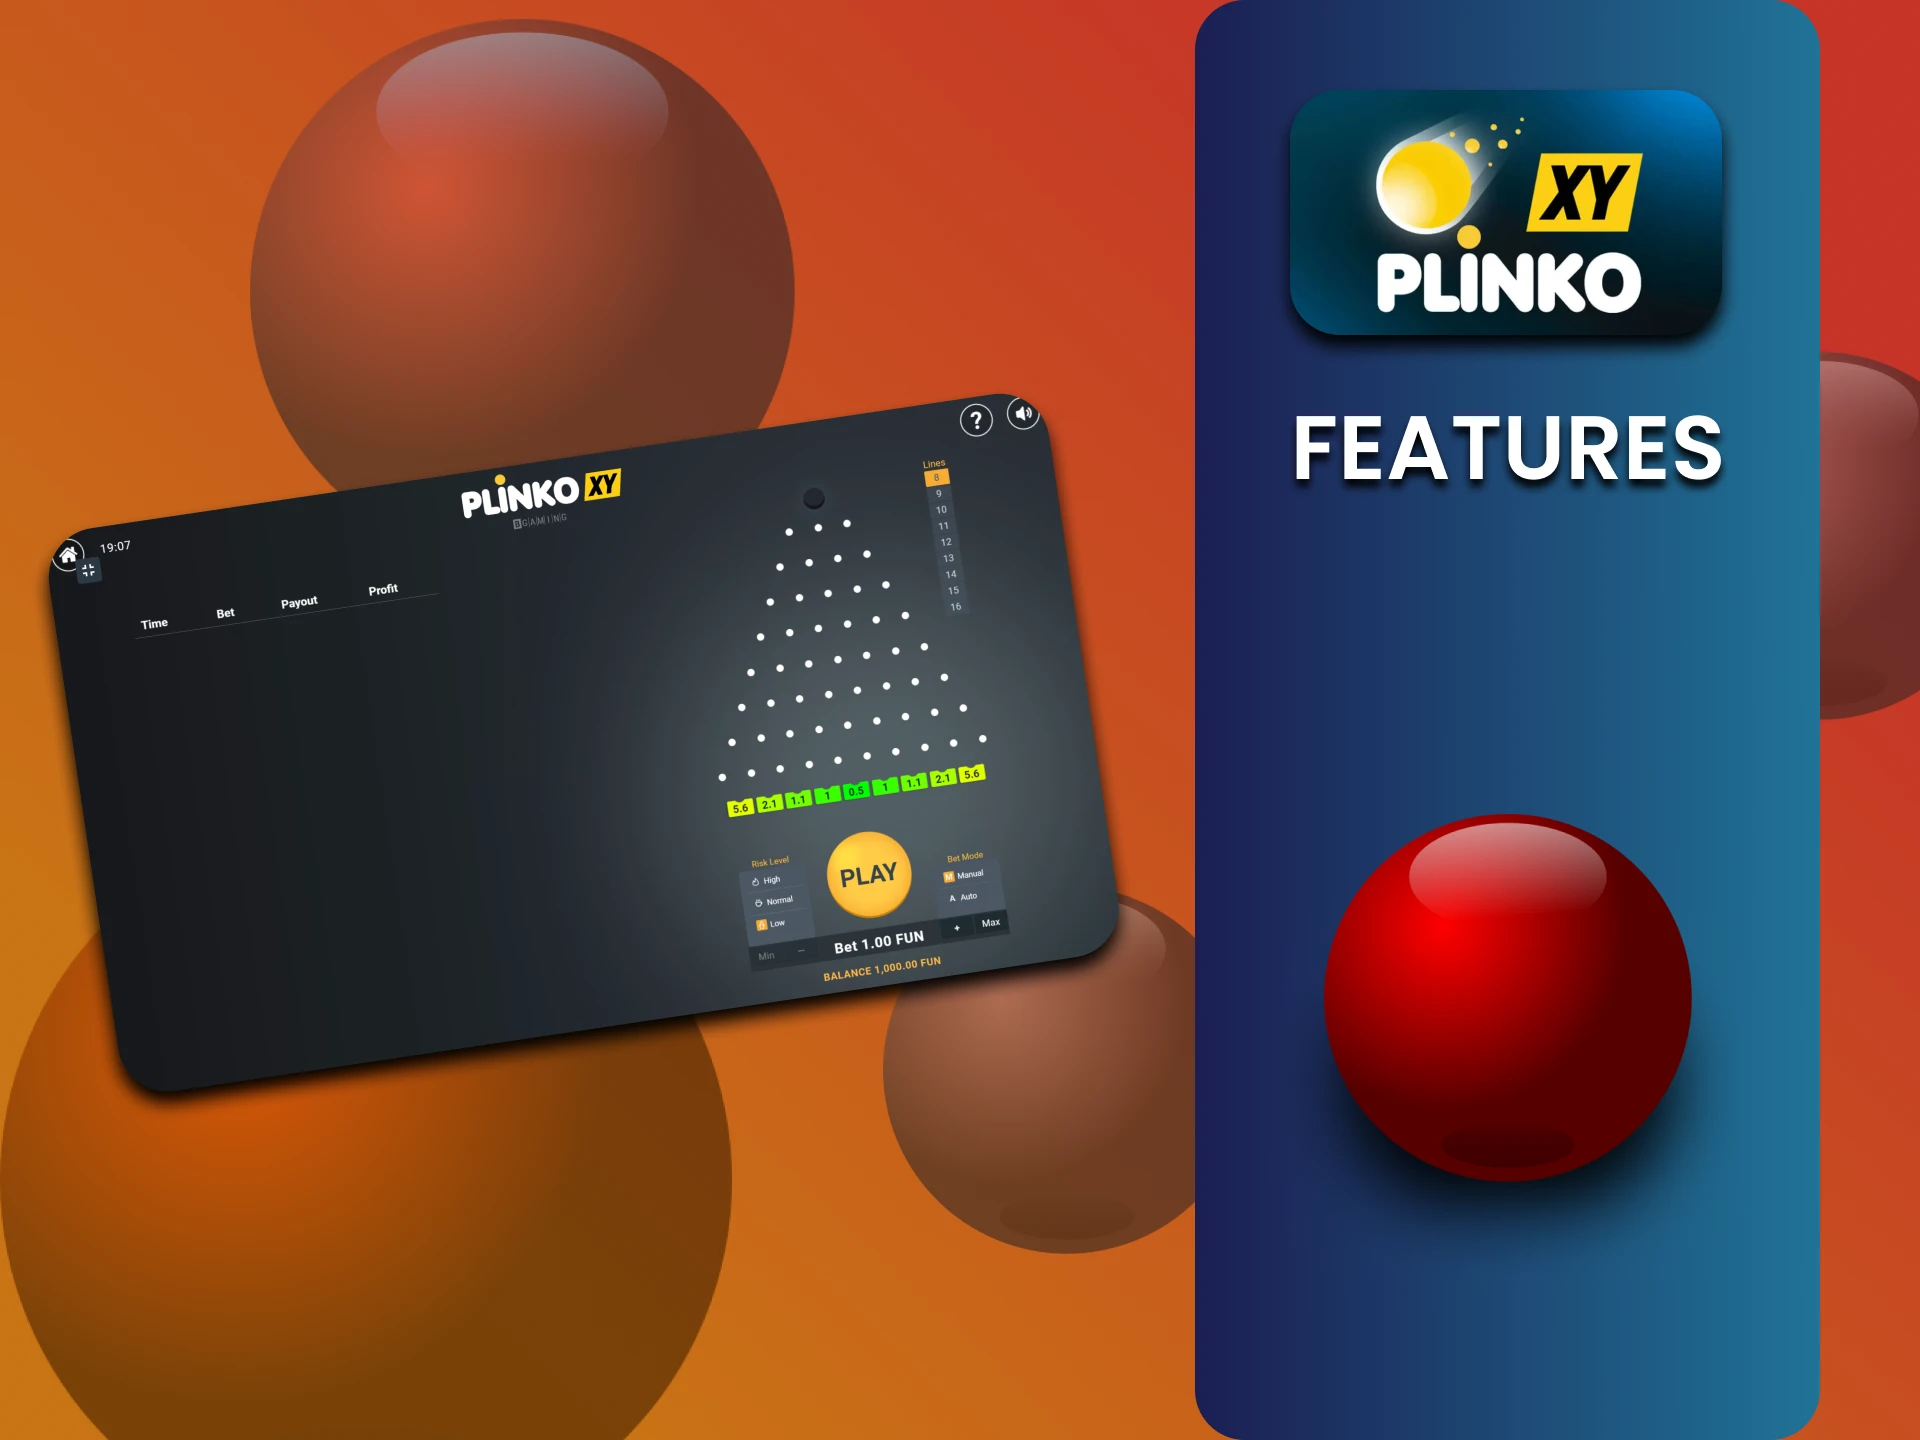 Find out how the Plinko XY game works.